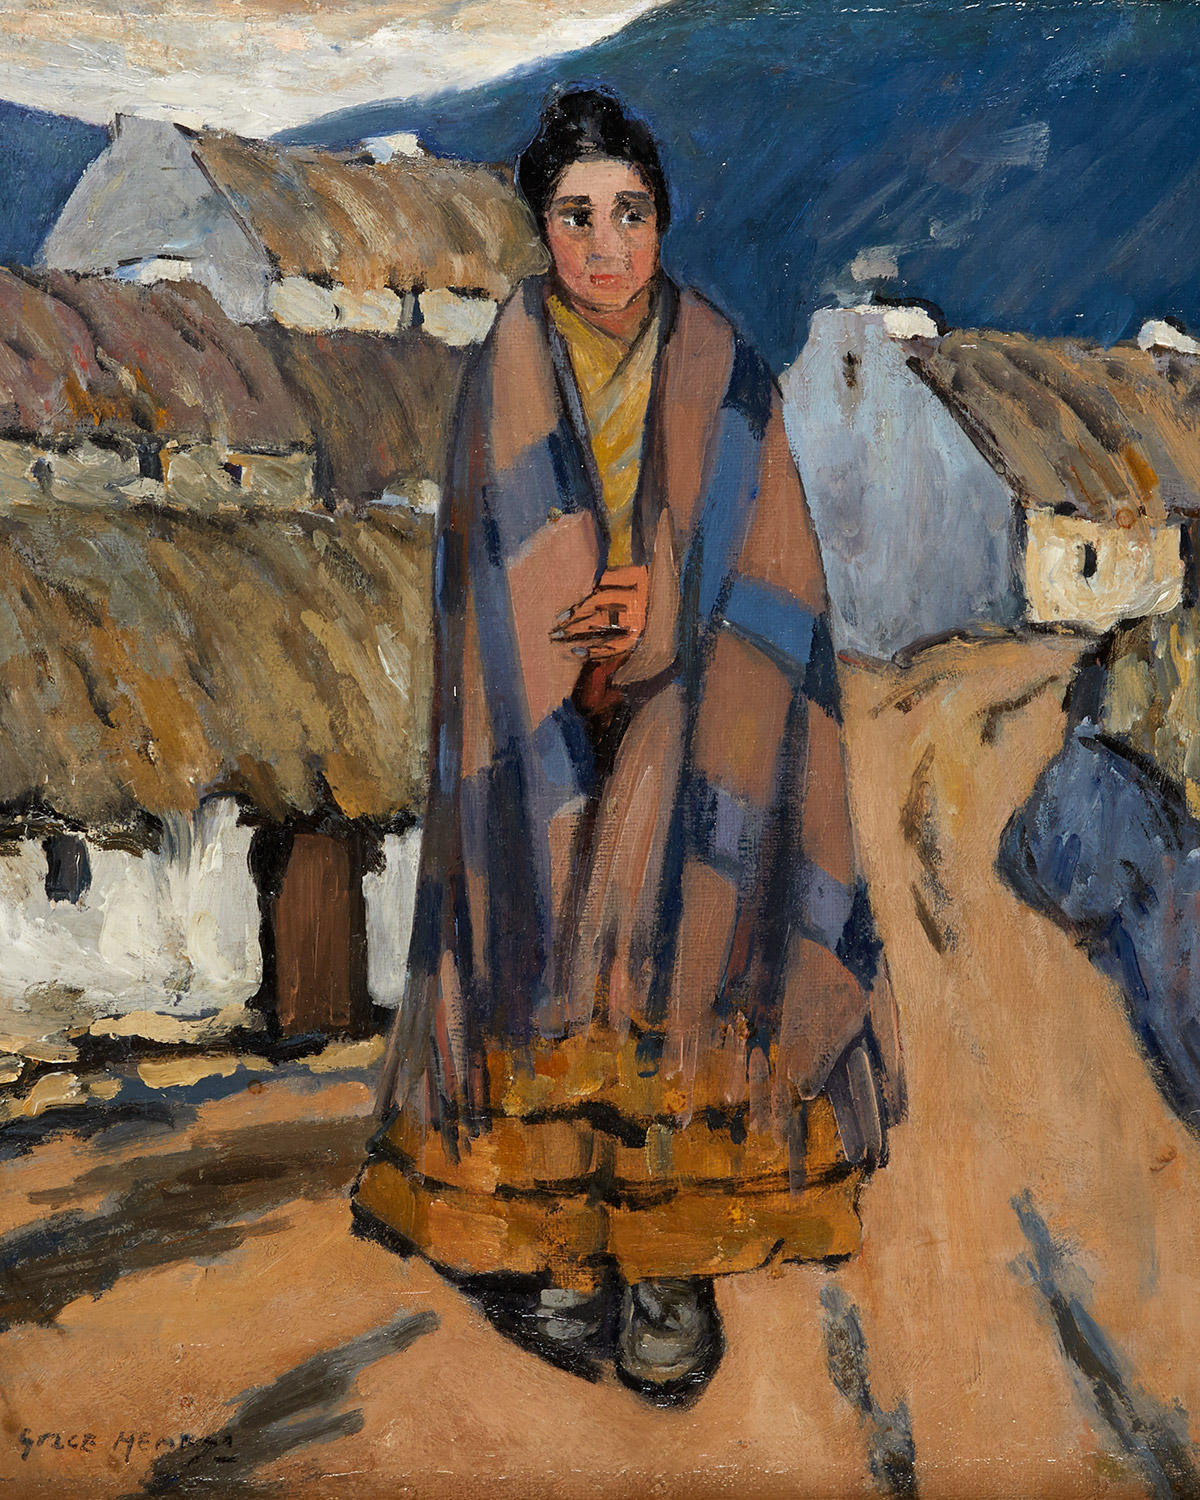 A painting entitled "Lady of the West" by Grace Henry